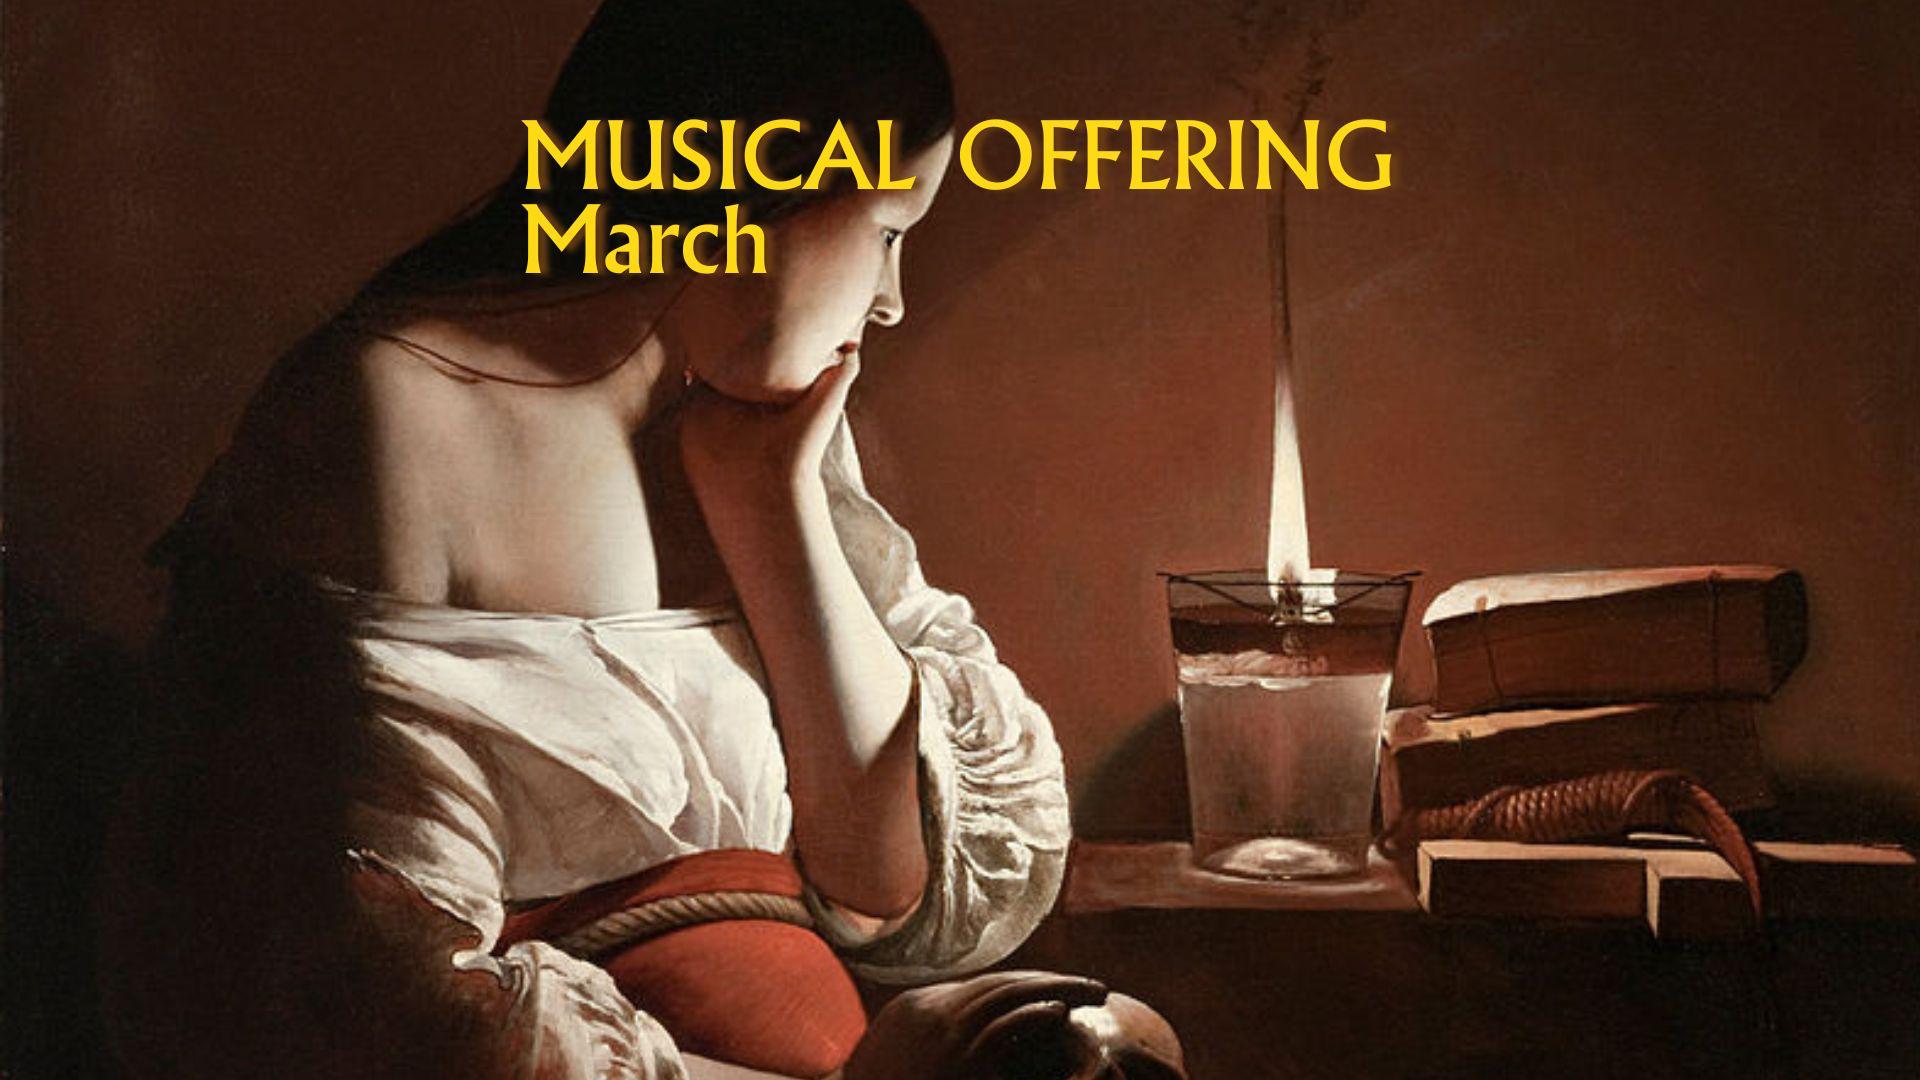 Musical Offering March Concert ~ Live Broadcast